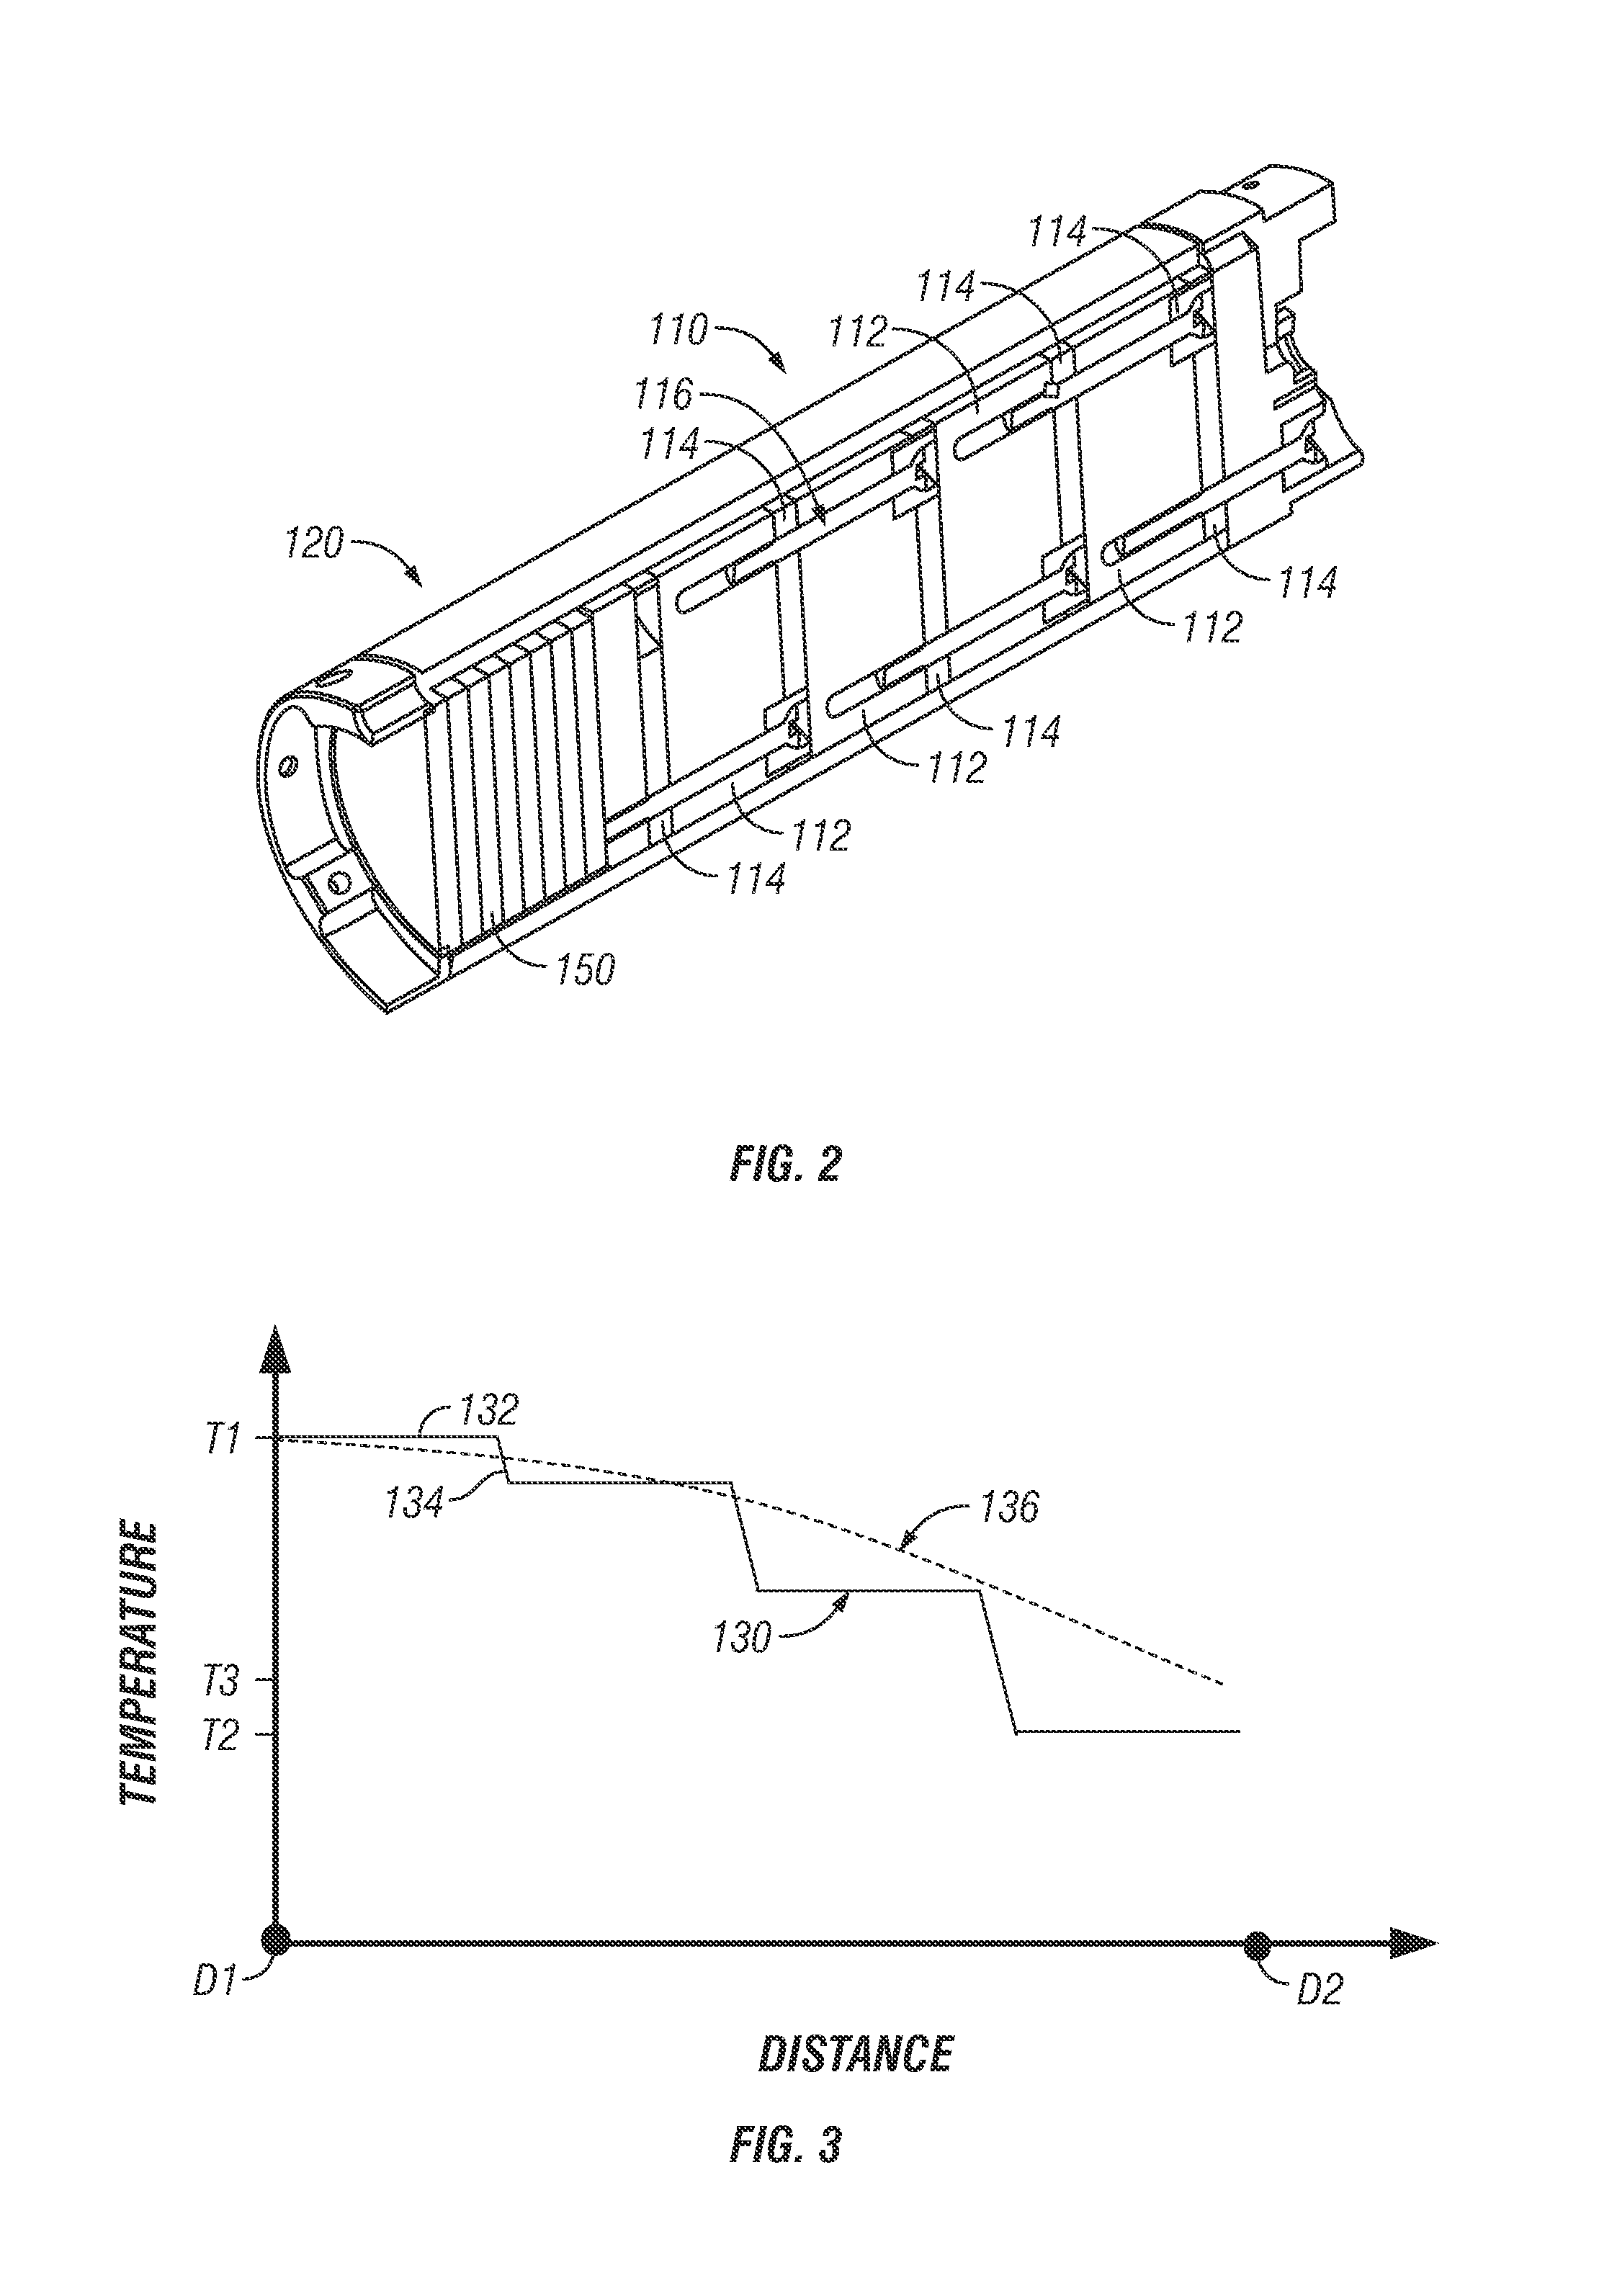 Thermal isolation devices and methods for heat sensitive downhole components